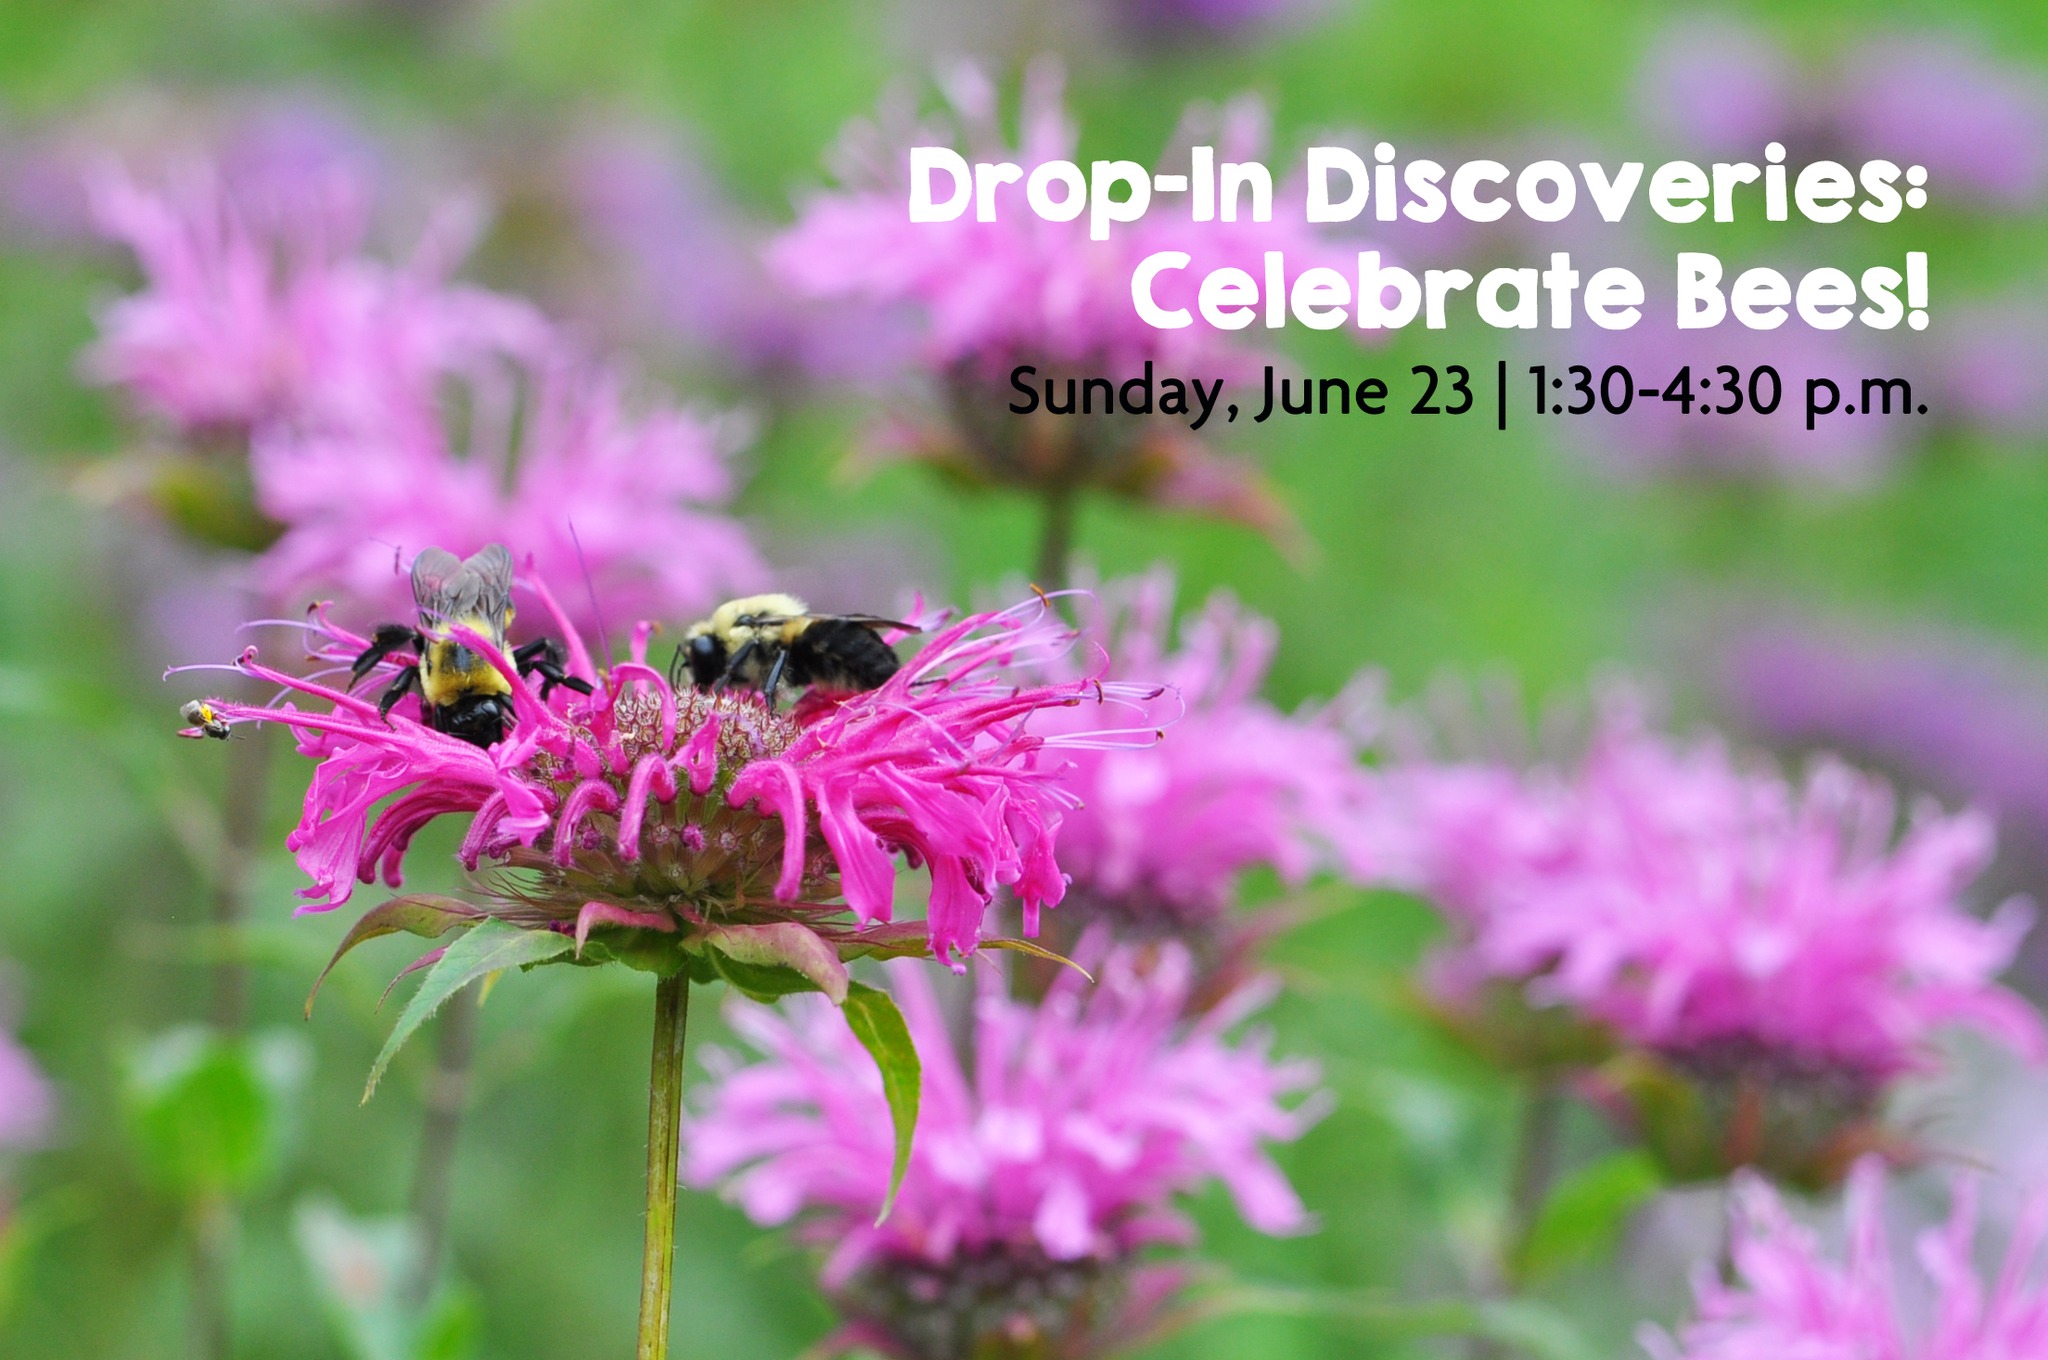 several bees at a bright pink bee balm. text: drop-in discoveries: celebrate bees! Sunday, June 23, 1:30-4:30 p.m.